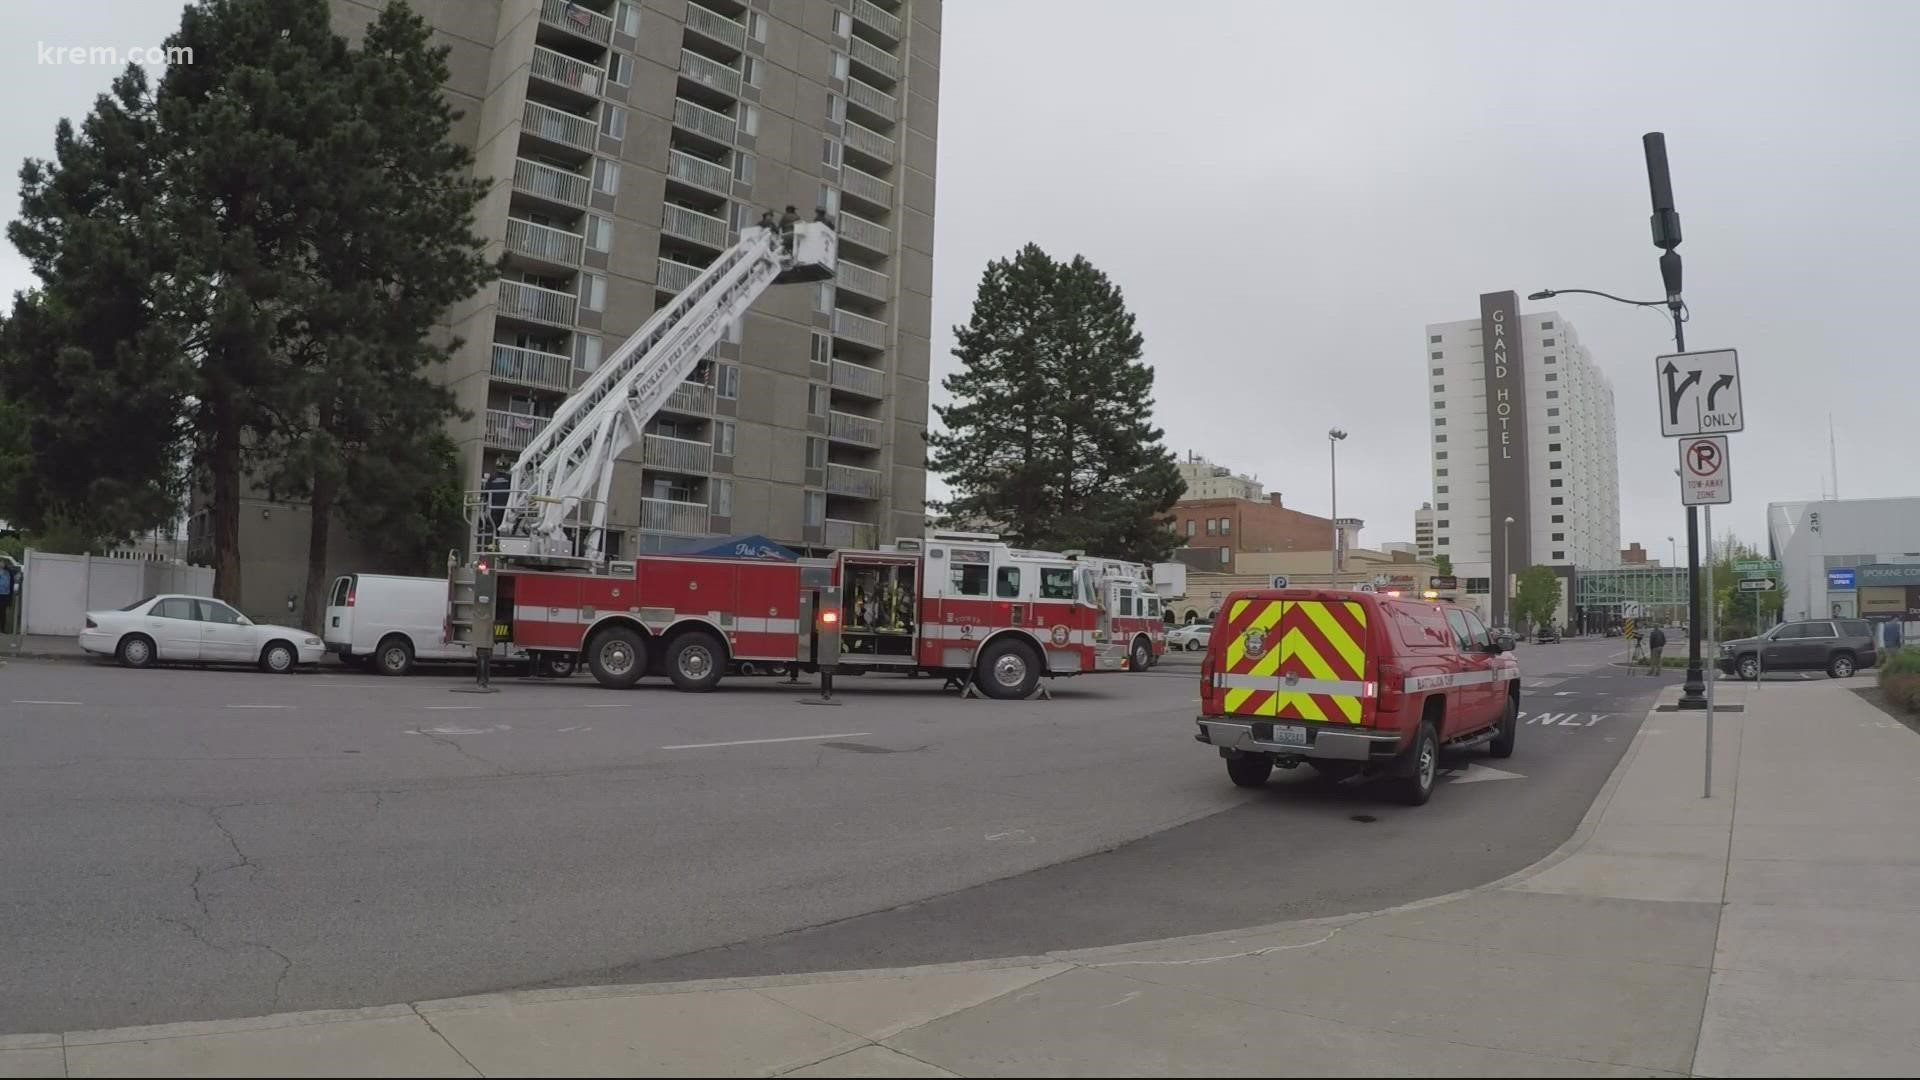 Over 50 firefighters responded to the scene on Thursday morning where a fire took place in the apartment. No people were injured.